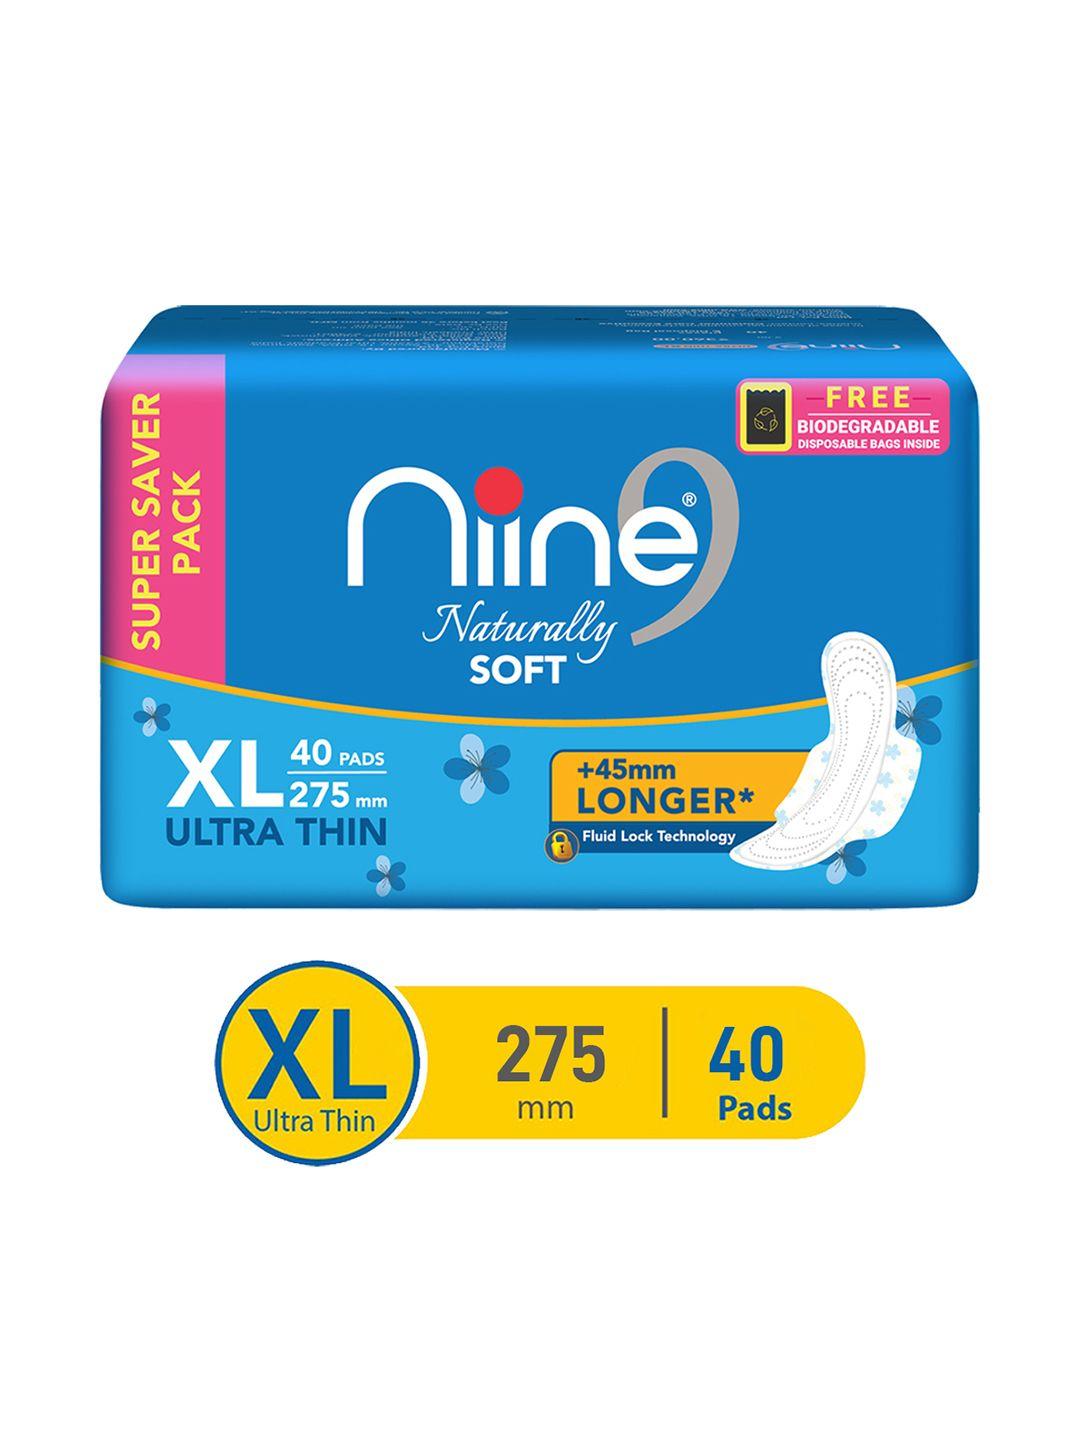 niine 40 pcs of ultra thin sanitary pads with biodegradable disposal bags - xl